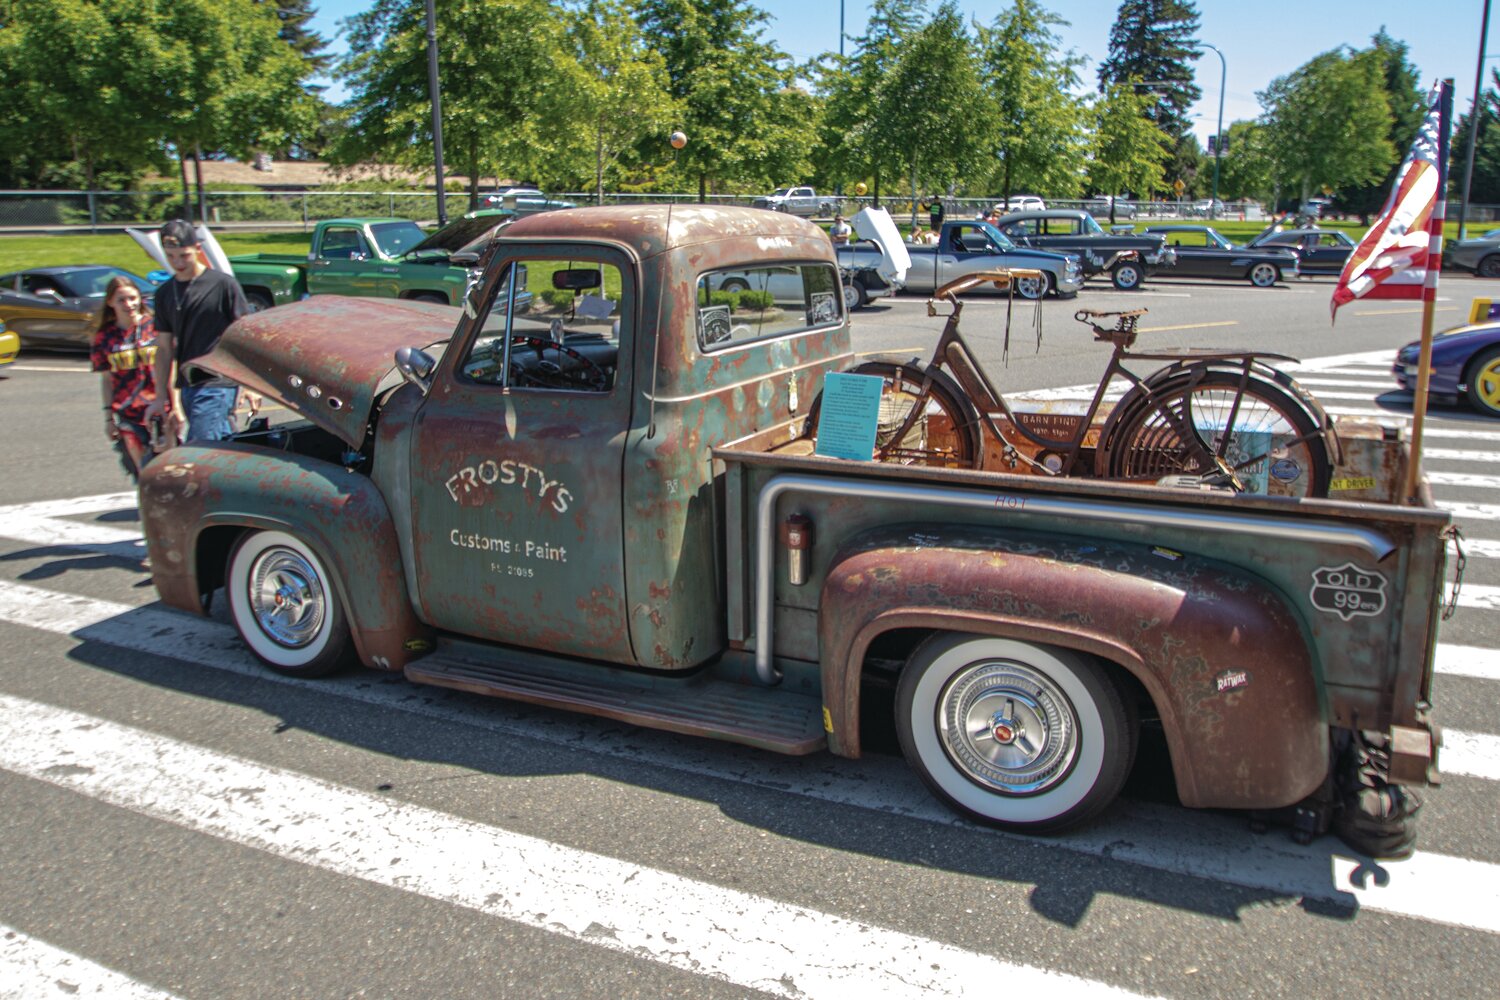 Russ and Linda Becker’s 1953 Ford F-100 “Old Rat” sits on display on Sunday, June 4, at the Yelm High School car show.